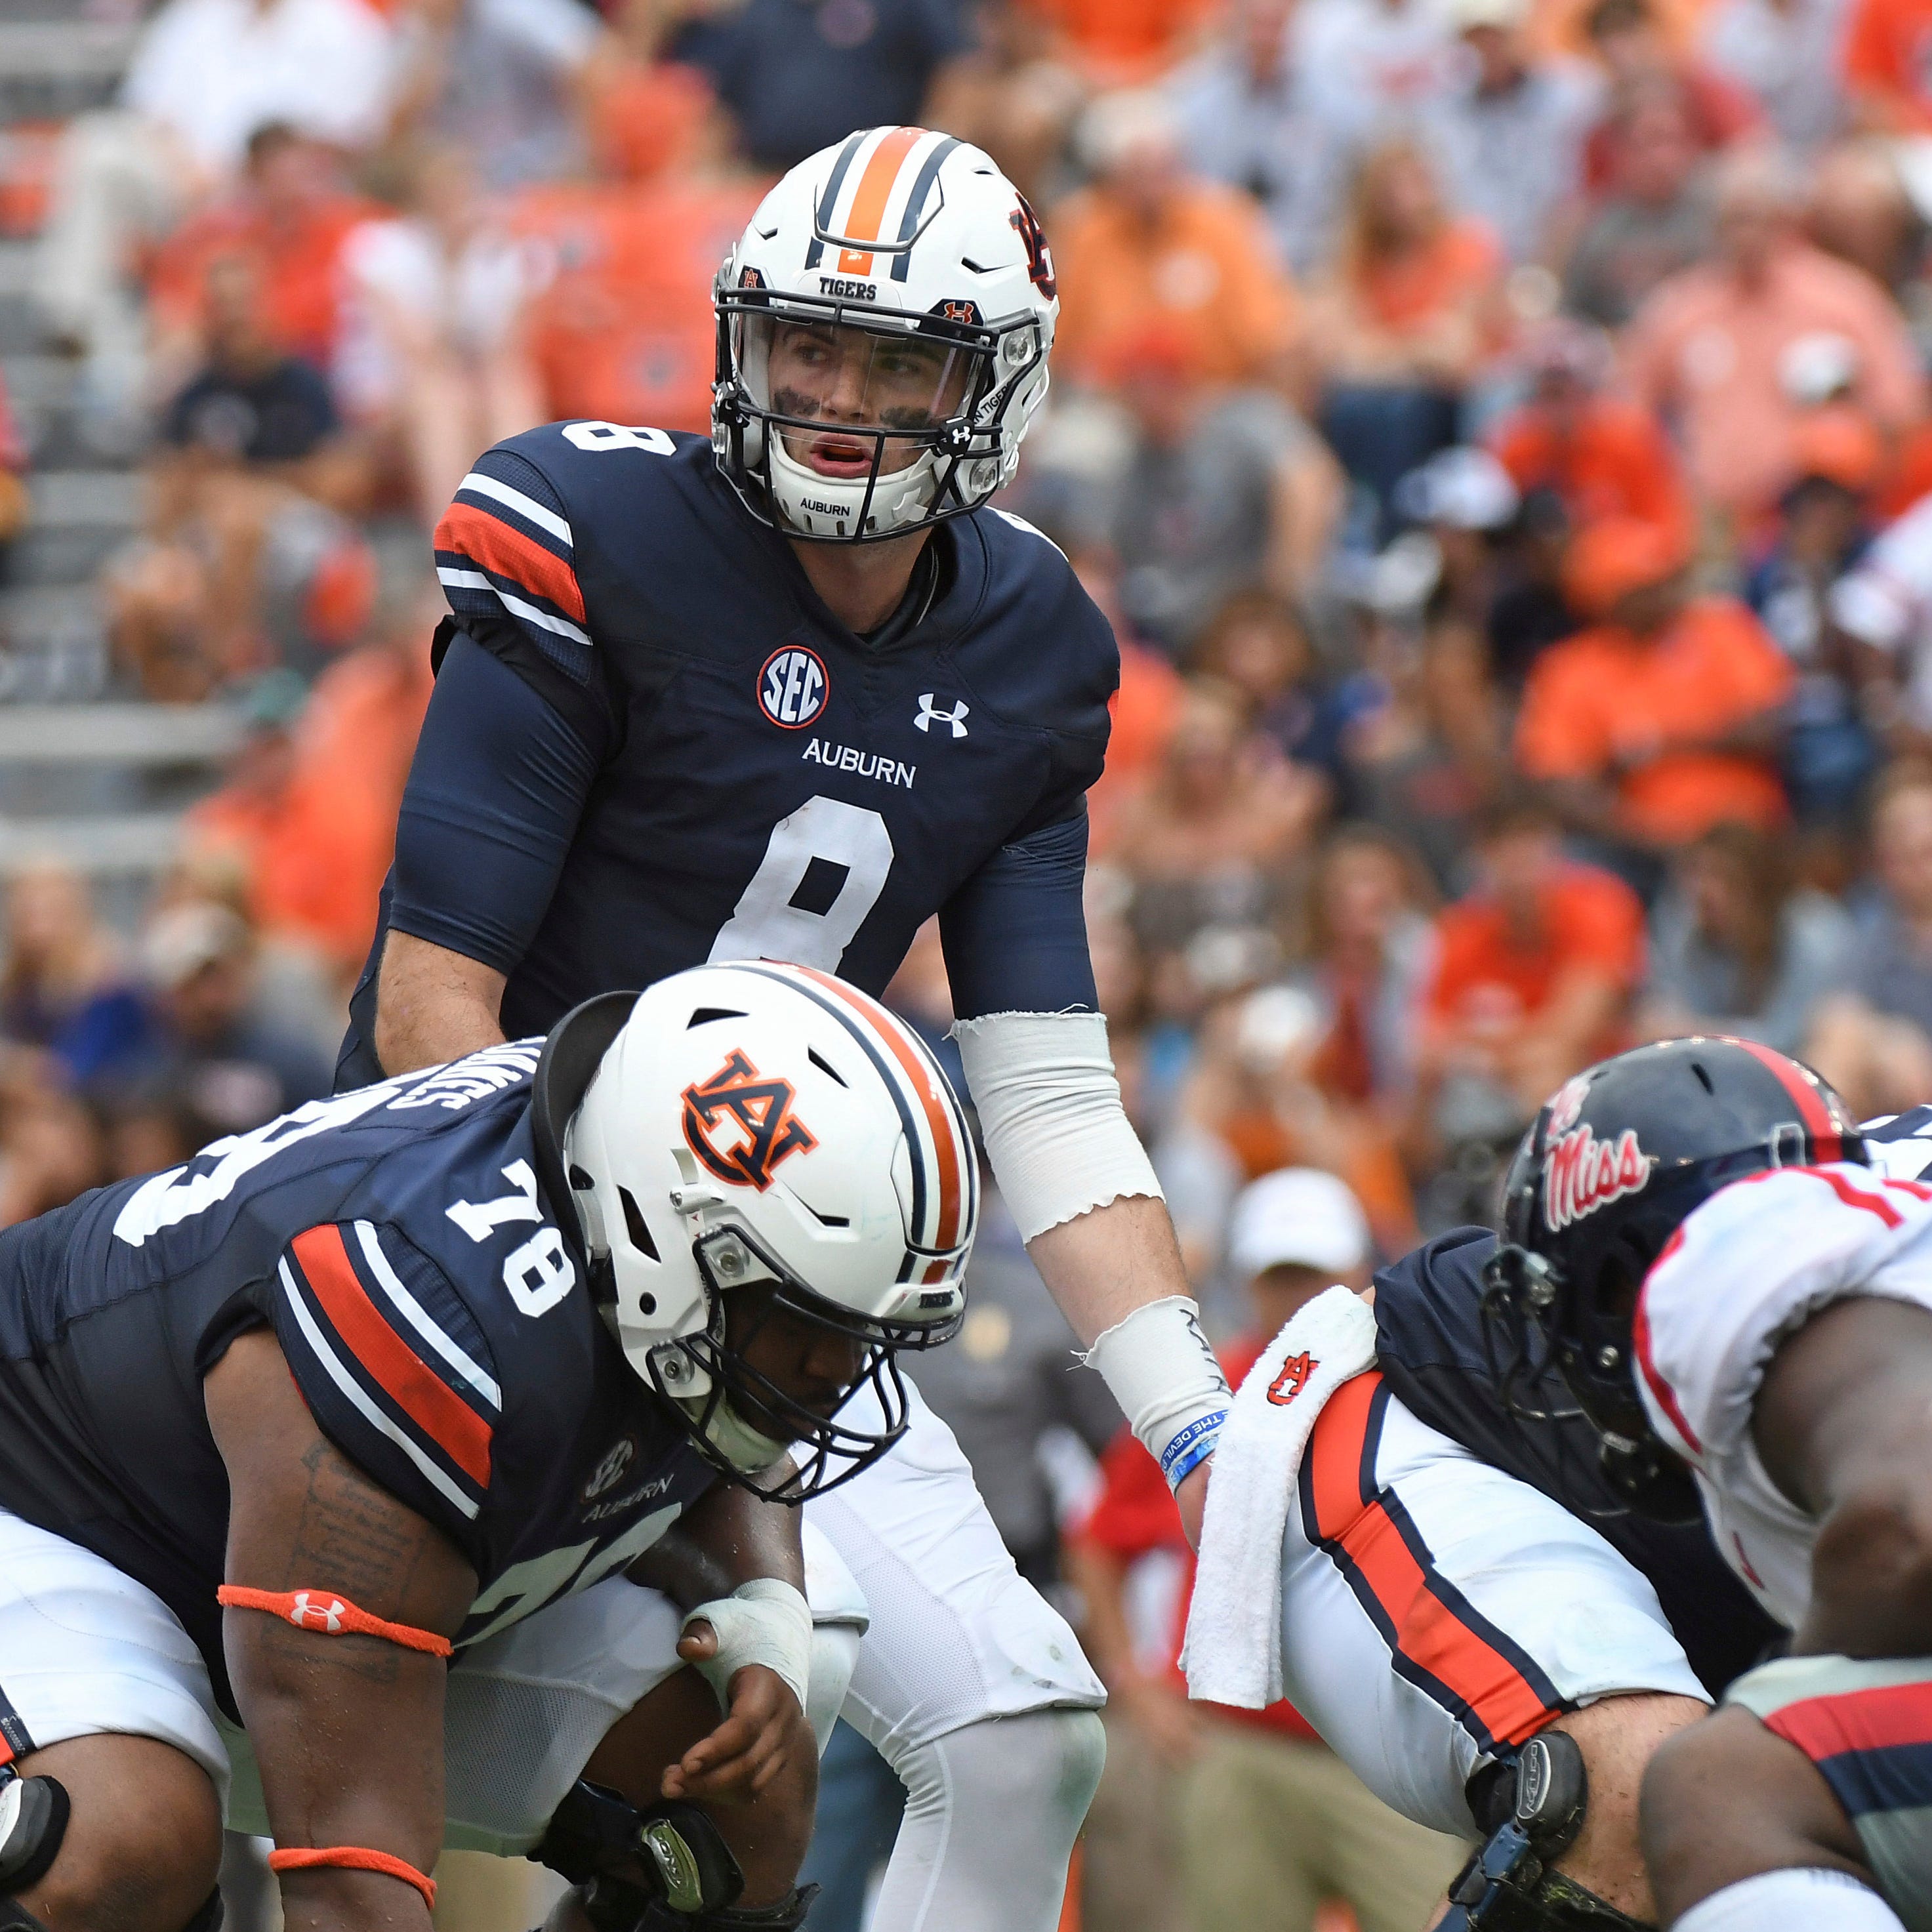 FILE - In this Oct. 7, 2017, file photo, Auburn quarterback Jarrett Stidham (8) looks to the sideline during the second half of an NCAA college football game against Mississippi, in Auburn, Ala. Last season scoring was down in college football, a dro